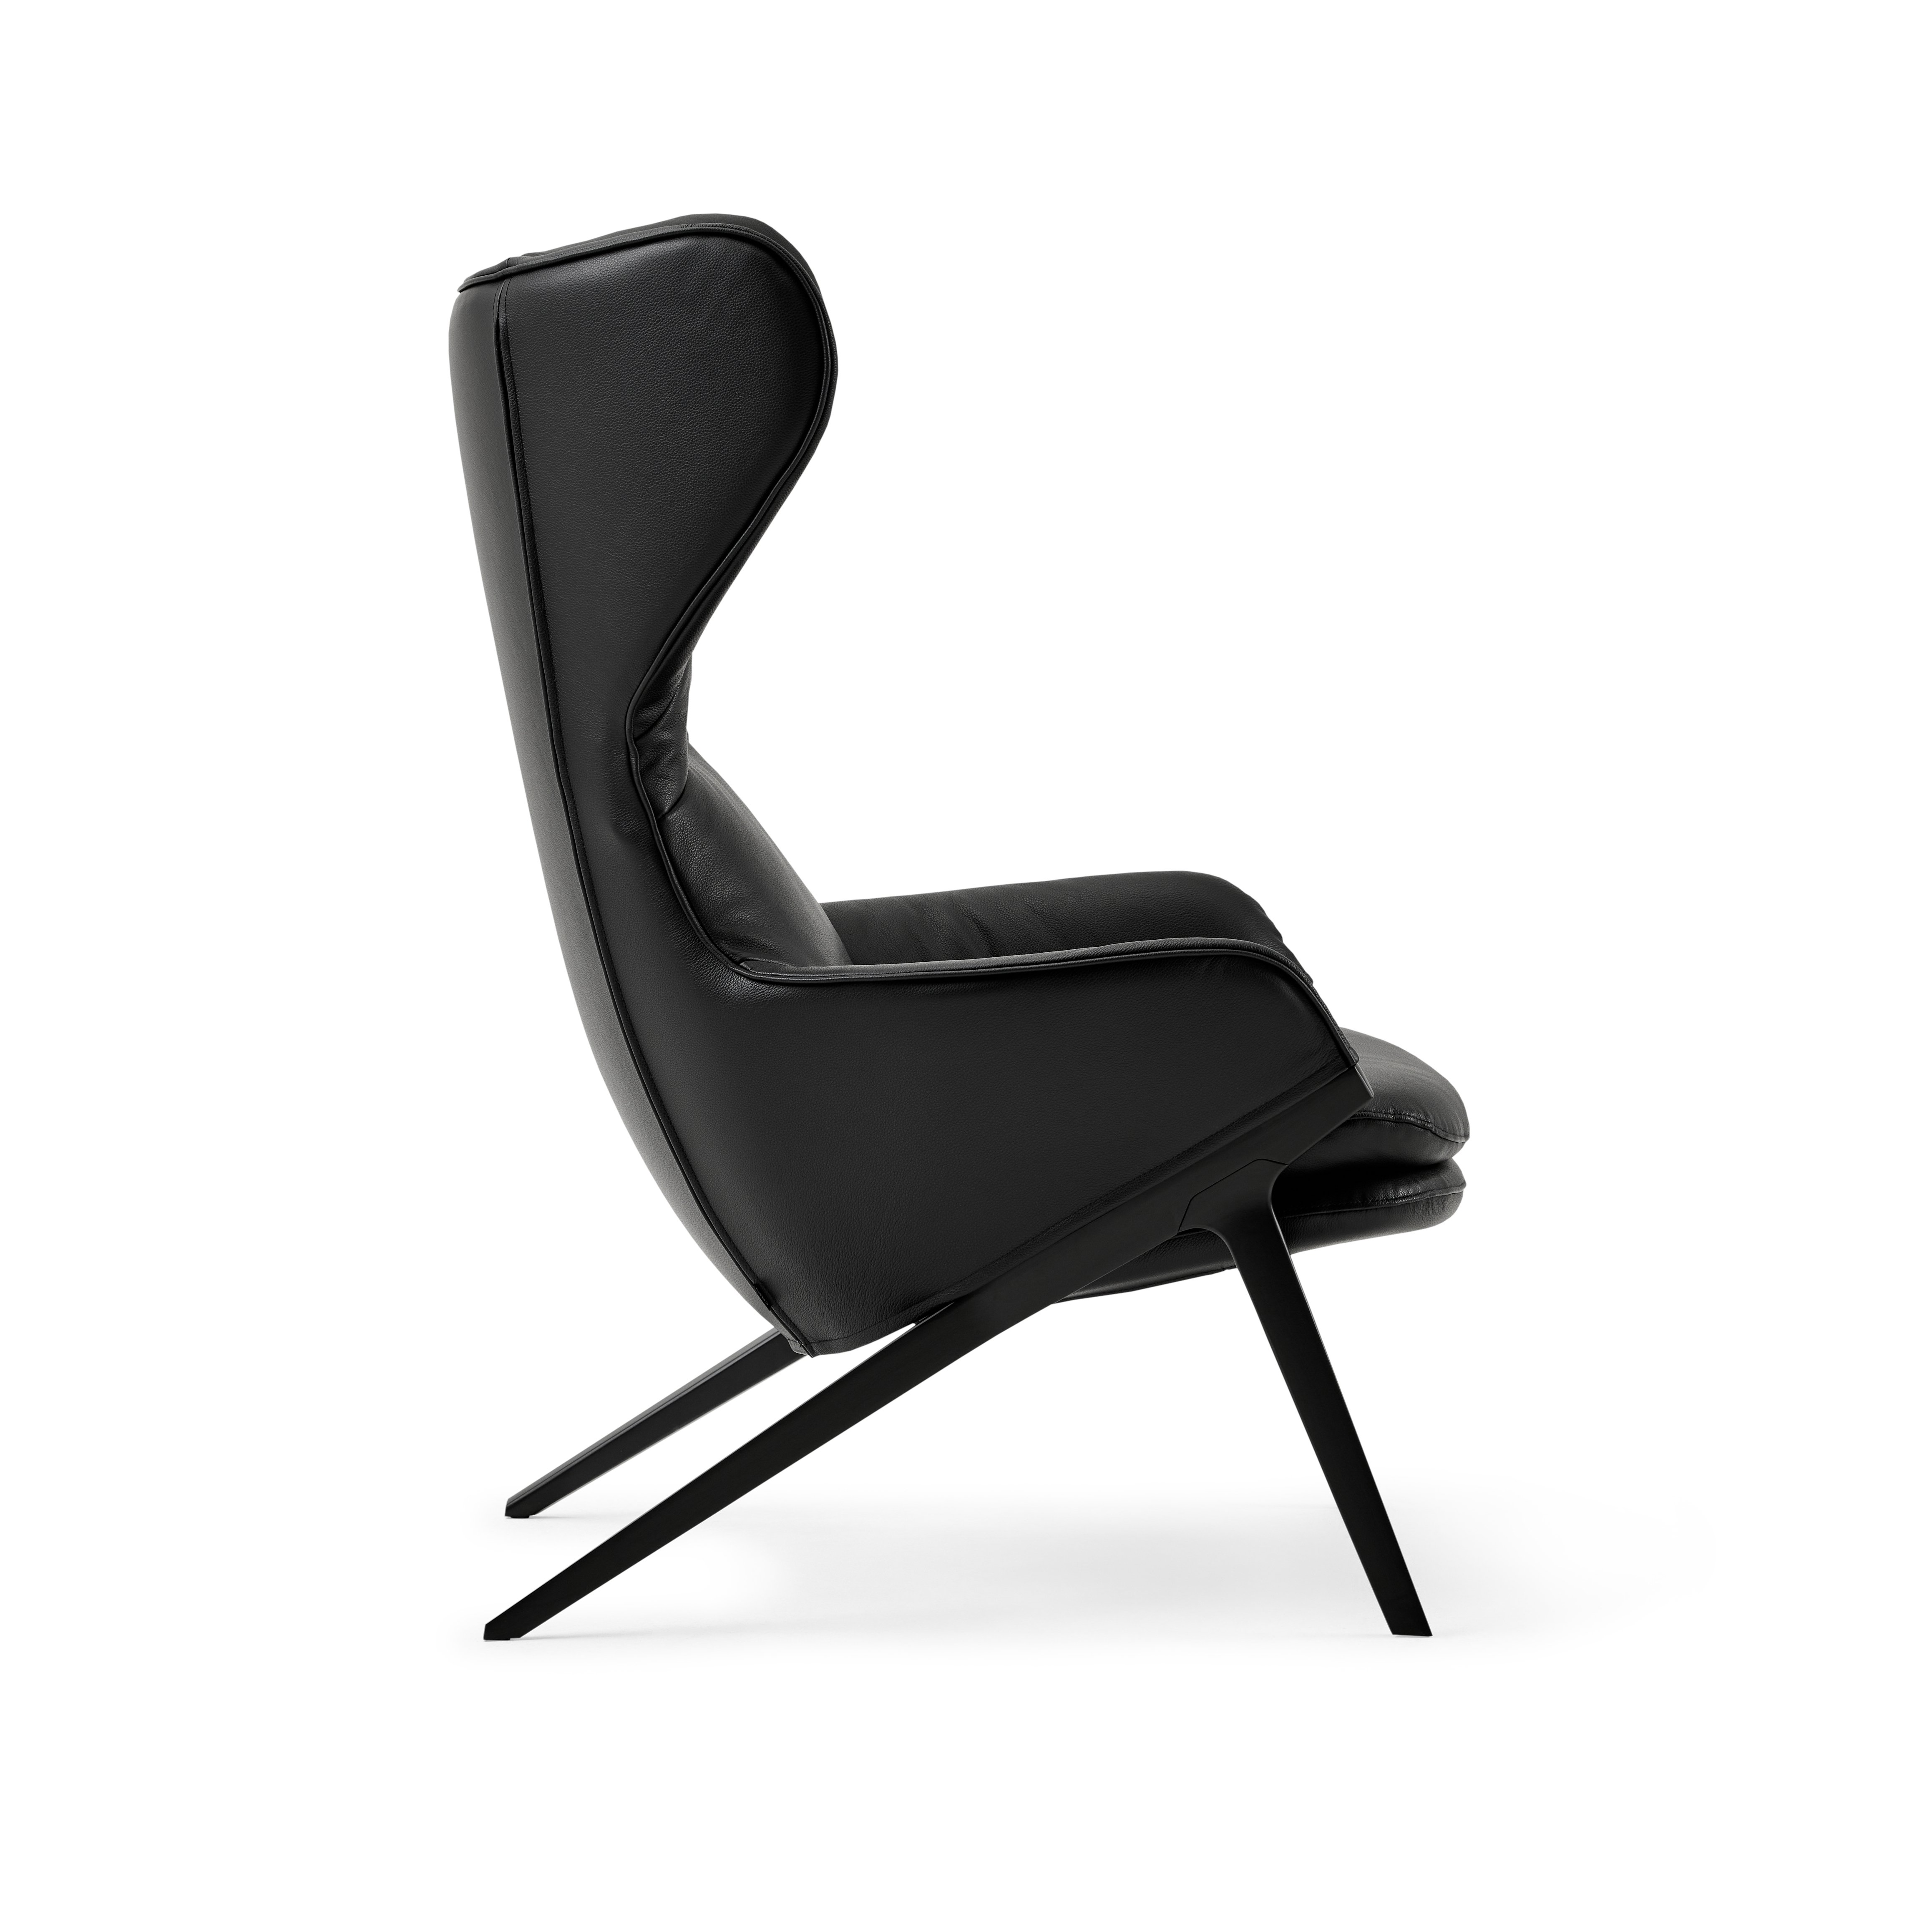 Detail side shot of the P22 lounge chair in Grafite